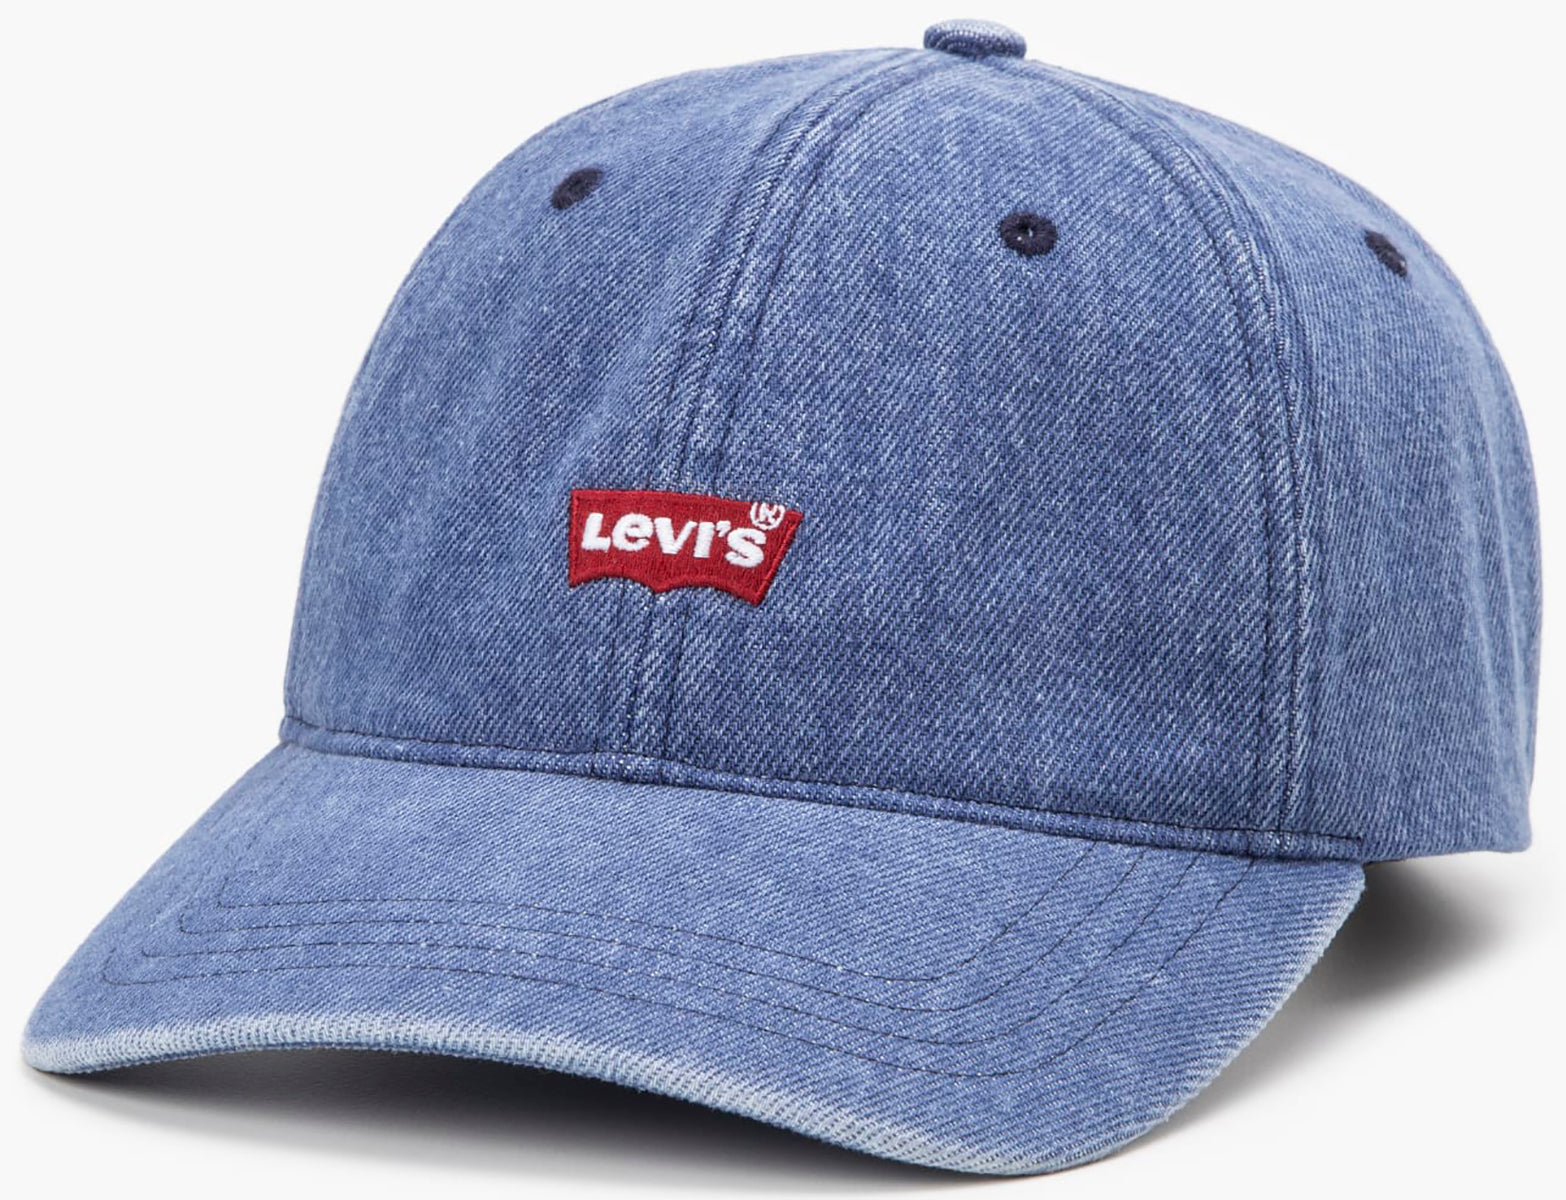 Levi Housemark Dnm In | Hat 4feetshoes Jeans Flex Fit – Casual Baseball